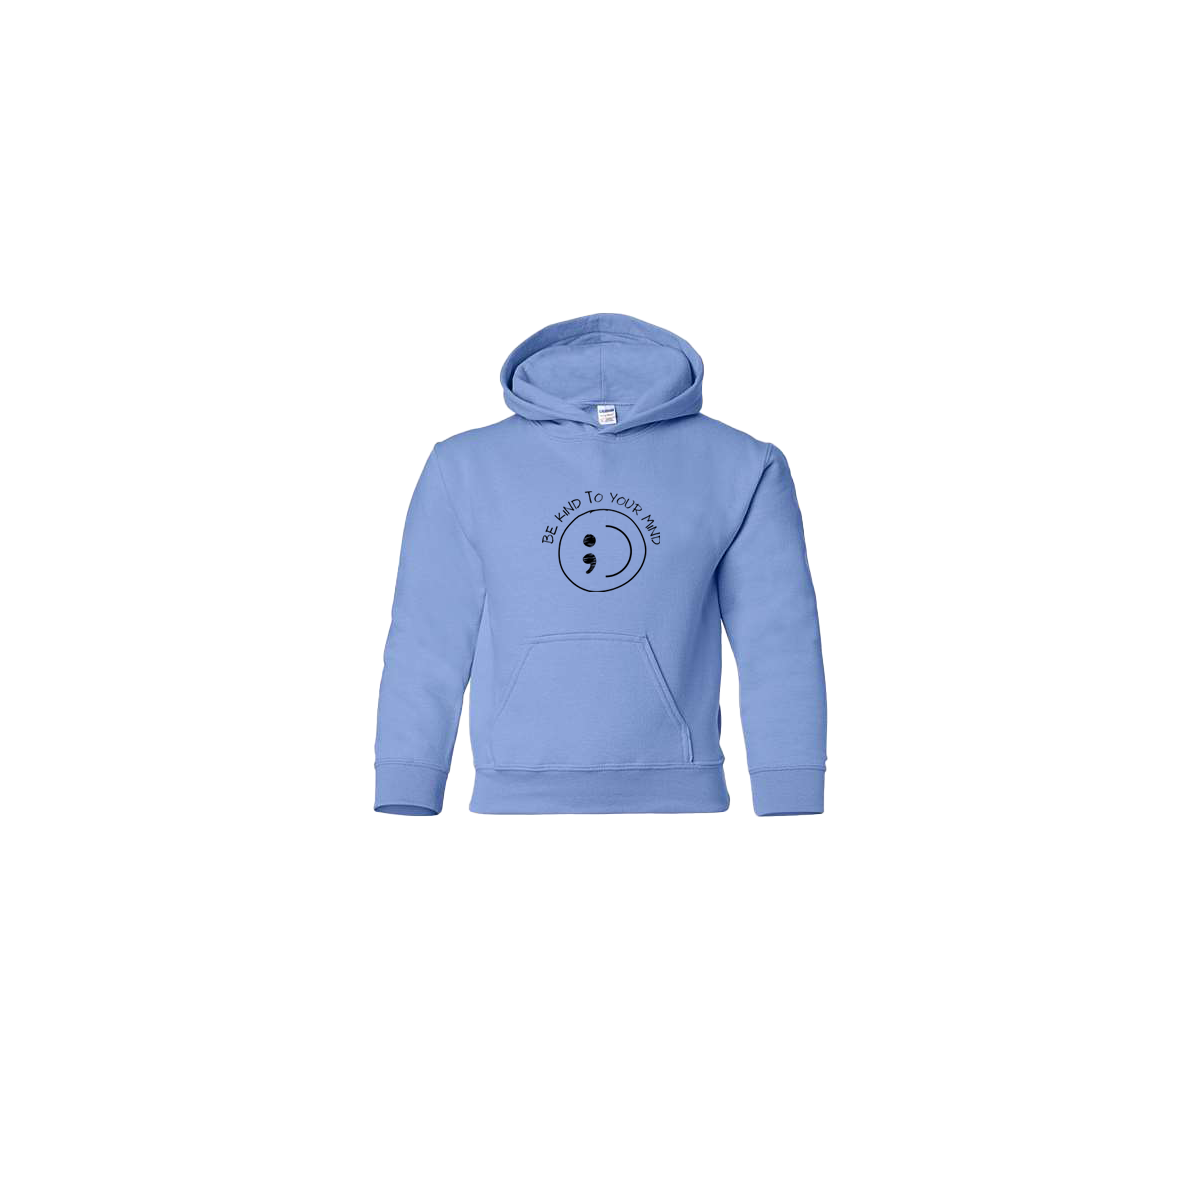 Be Kind To Your Mind Smiley Face Embroidered Light Blue Youth Hoodie